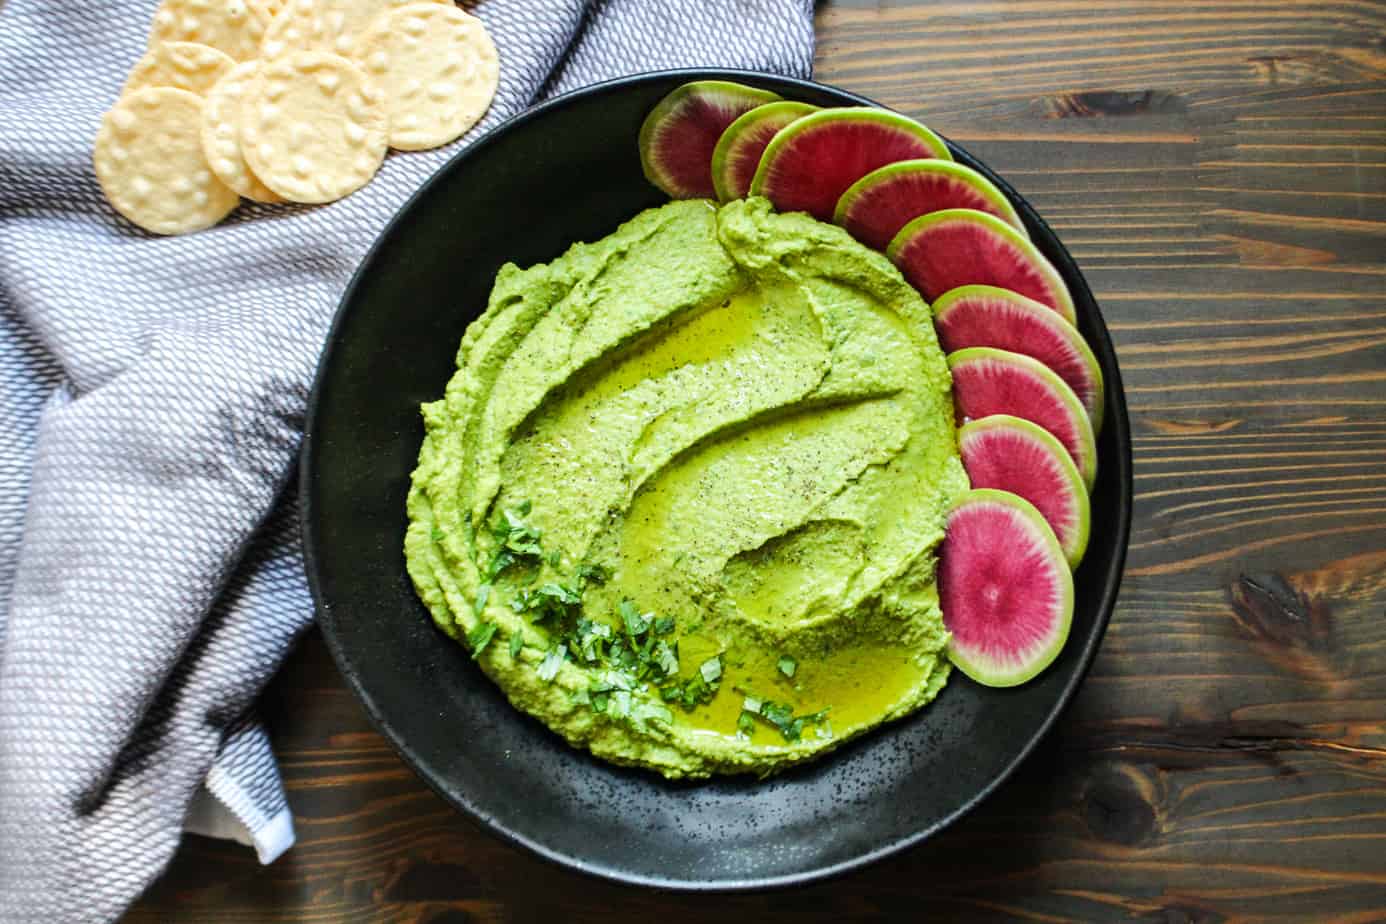 black bowl with green hummus, garnished with olive oil and herbs, watermelon radish slices, and some rice crackers on the side